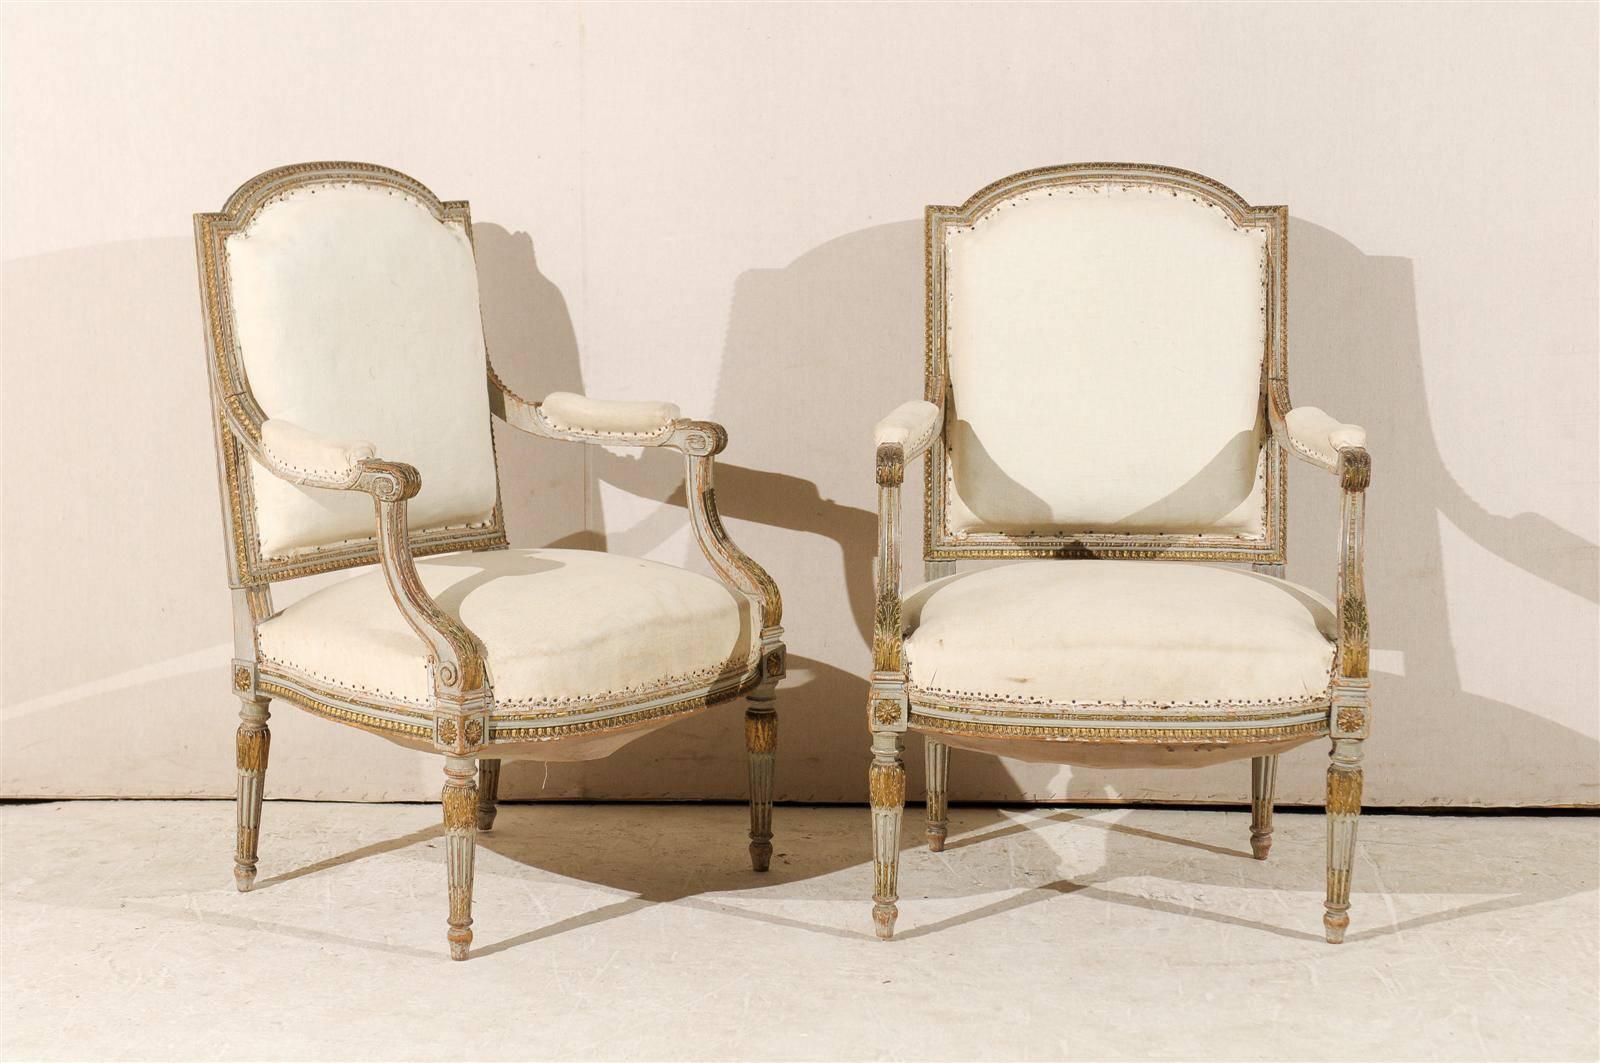 A pair of elegant French 19th century Louis XVI style fauteuils or armchairs with original paint, scrolled arms, fluted and tapered legs, gilded accents and Rosettes on the knees. Ready to be reupholstered. This pair would add a touch of beauty to